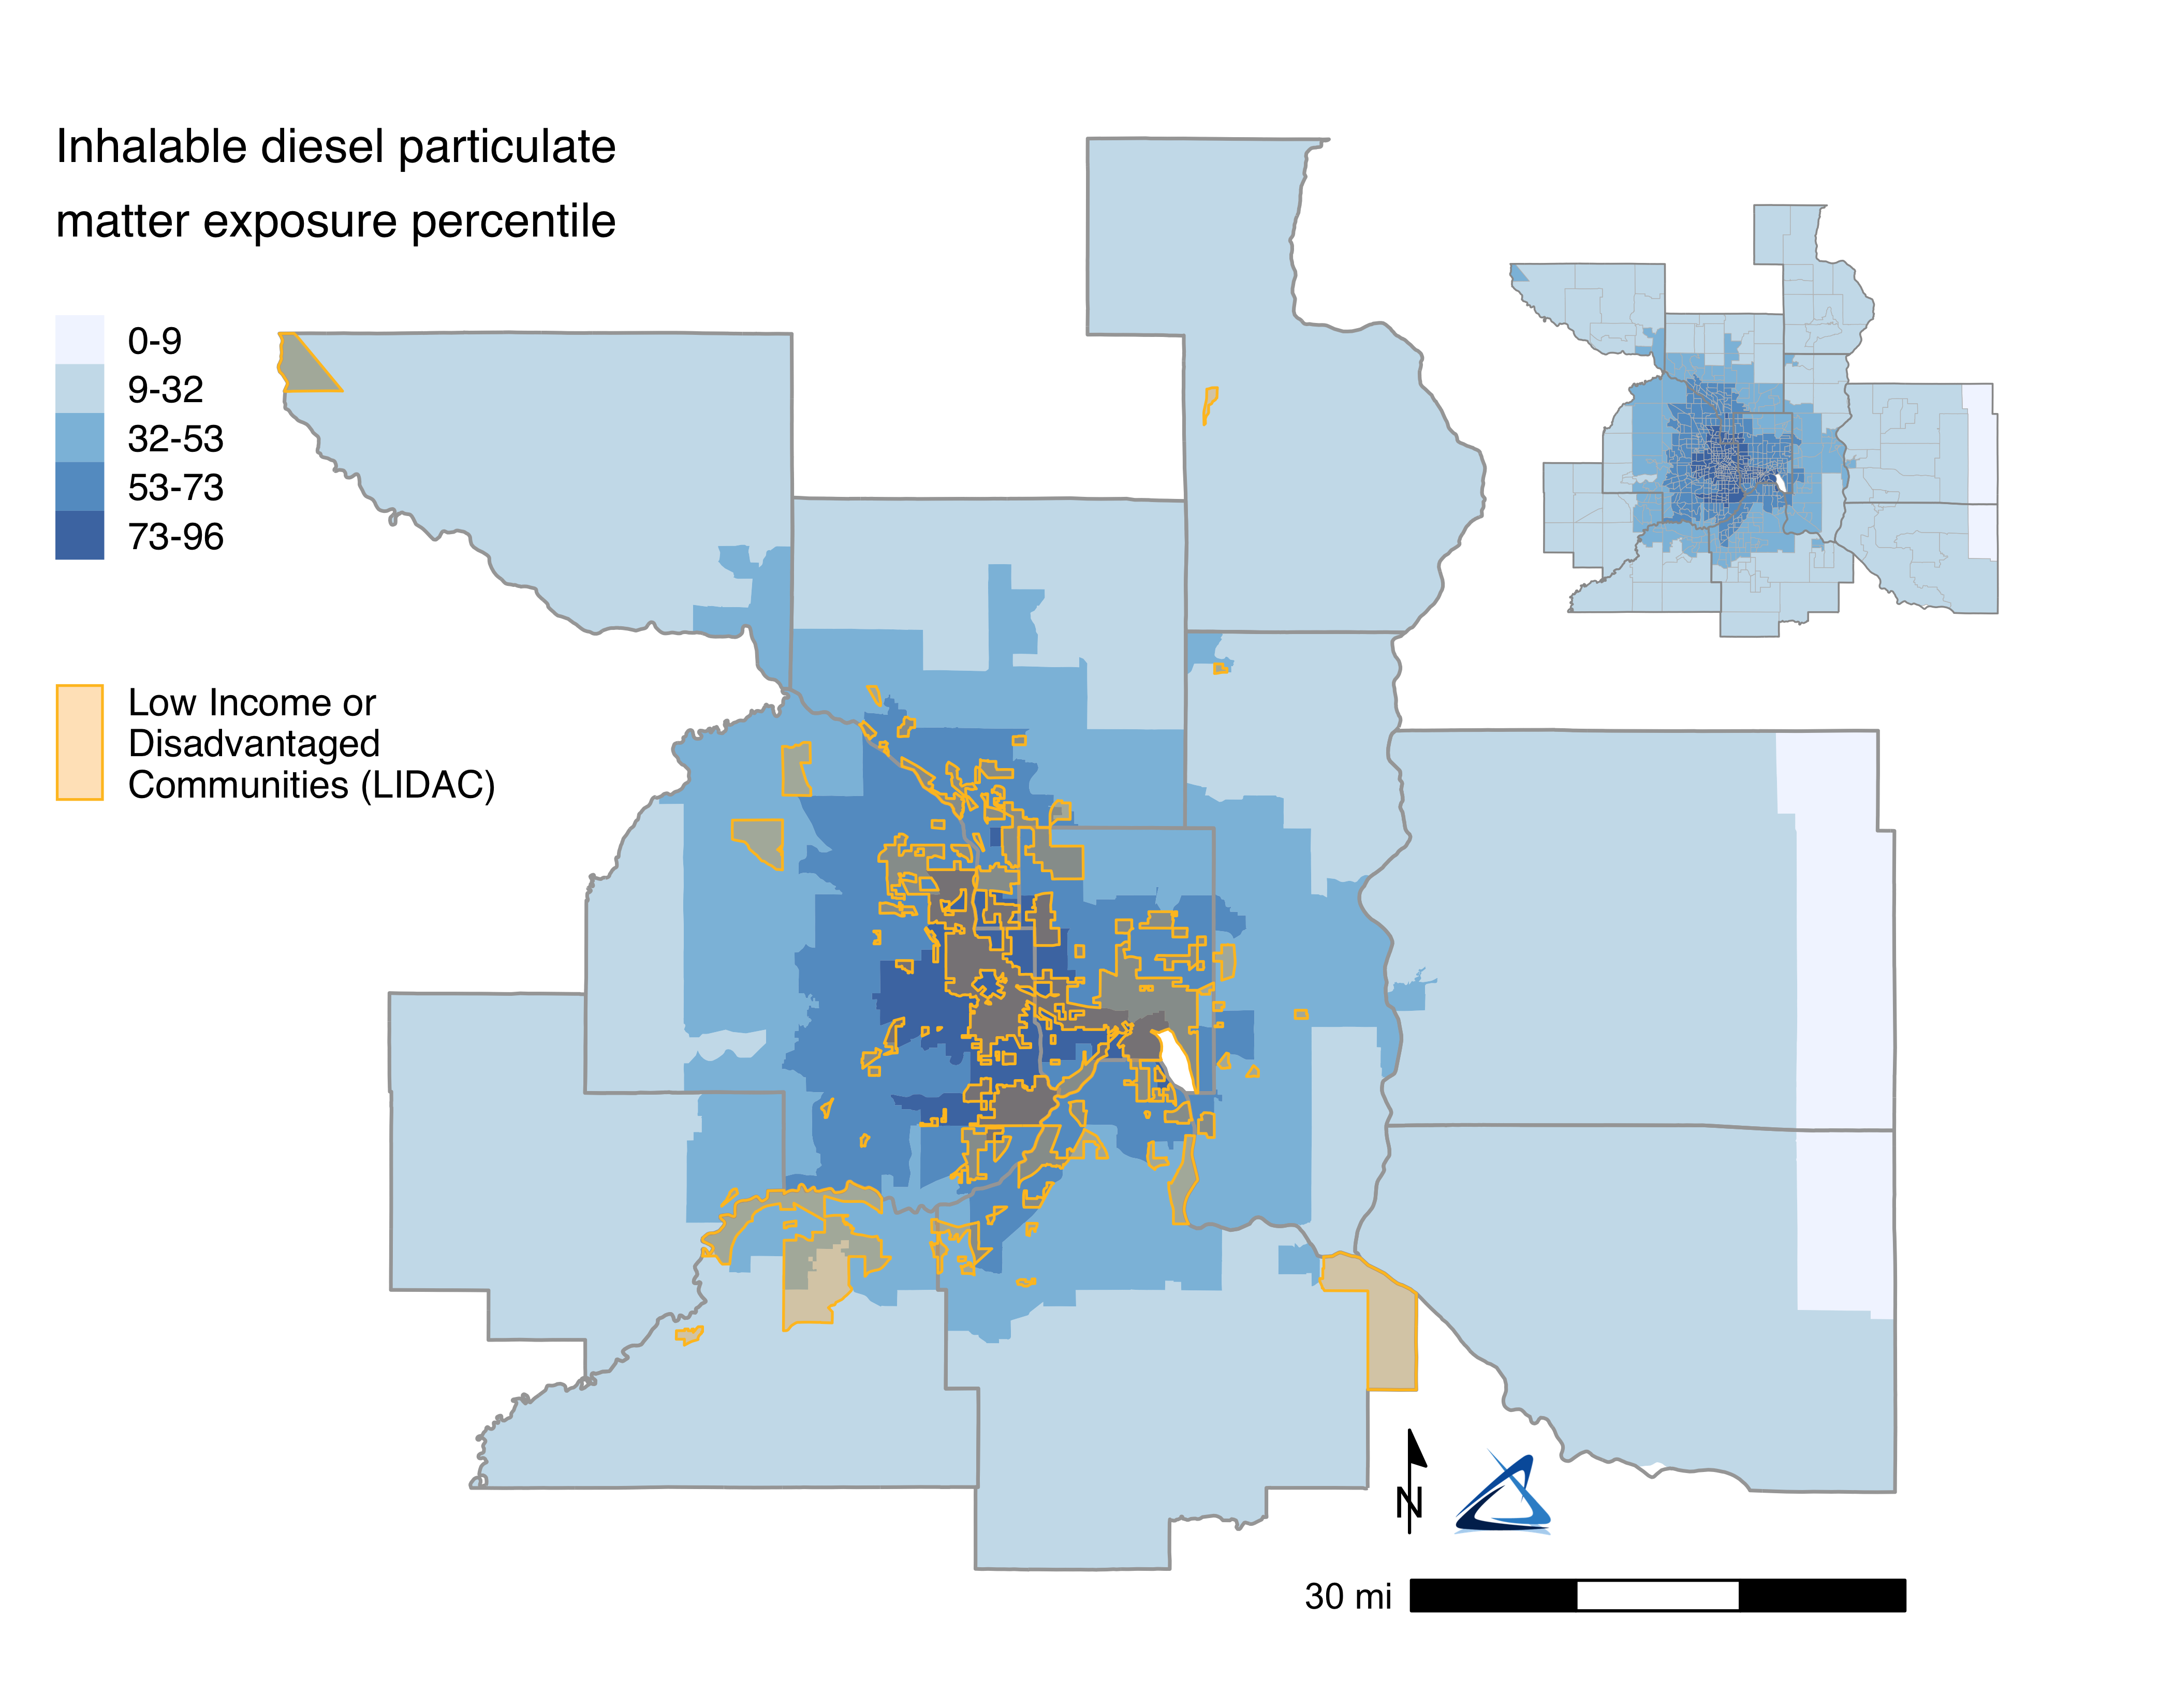 A map of LIDAC block groups overlaying concentrations of inhalable diesel particulate matter. There is noticeable overlap in the most polluted regions and where LIDAC block groups are concentrated, particularly in eastern Hennepin County.